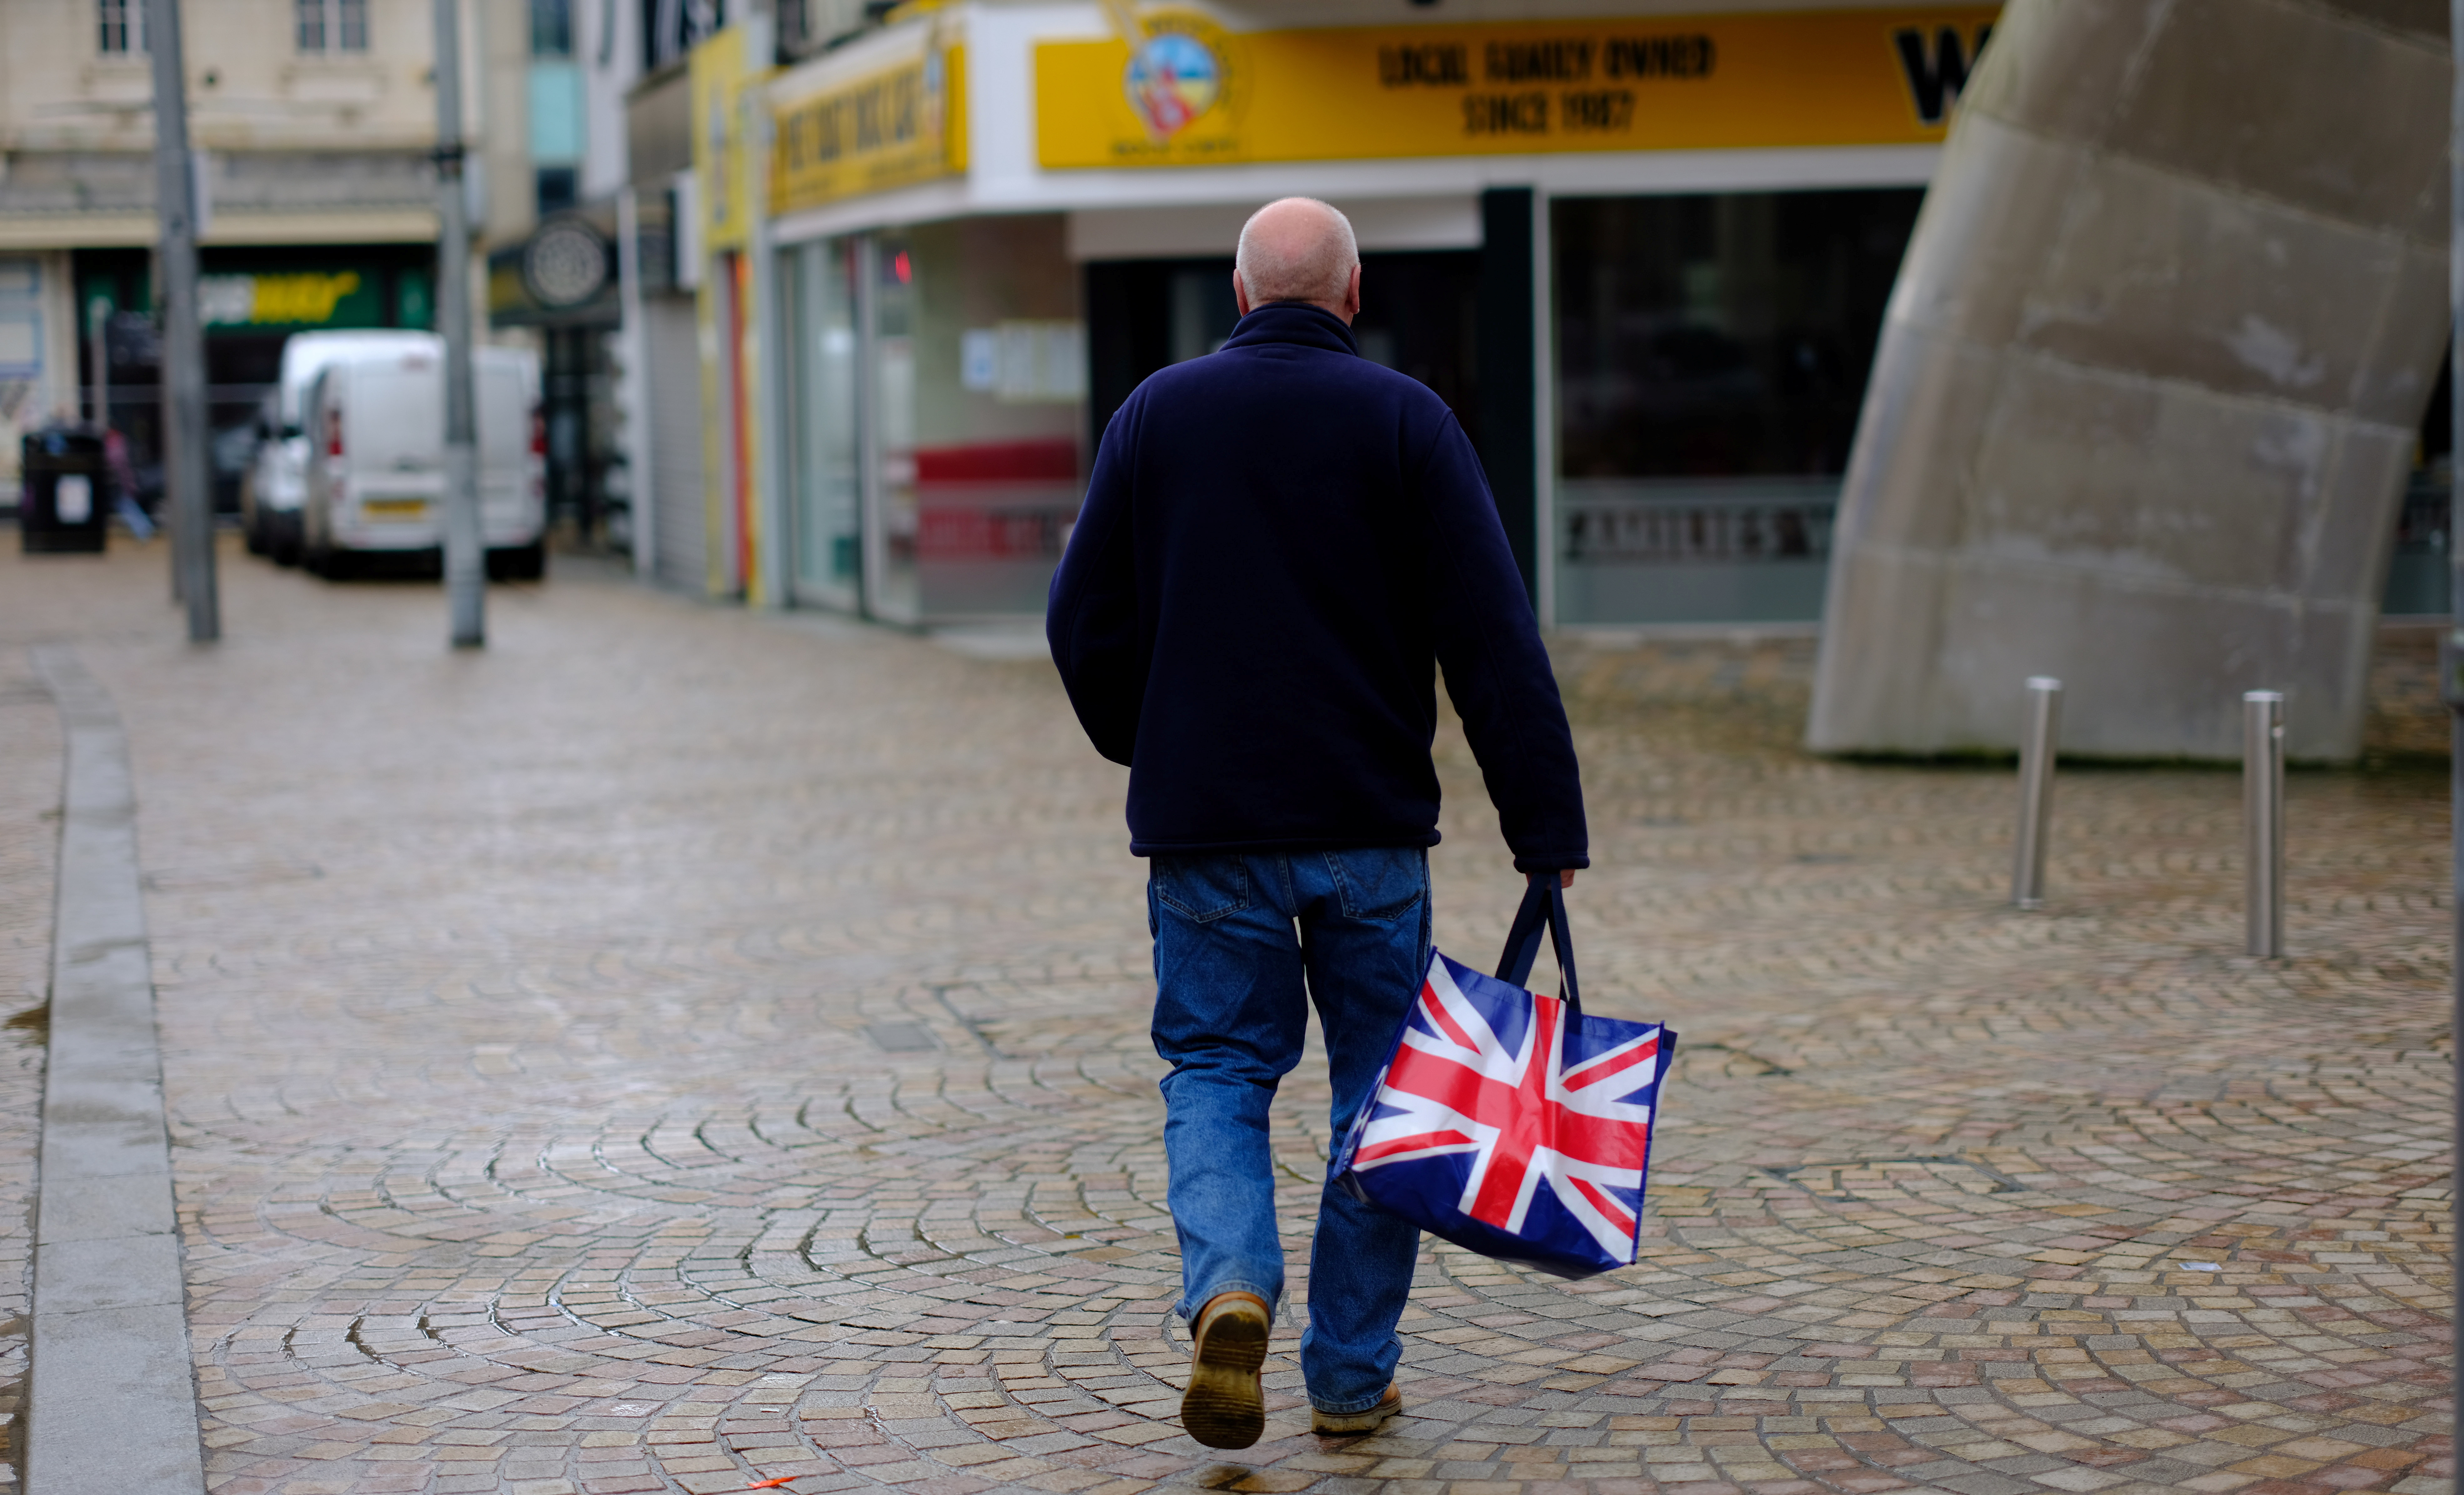 A man carries a Union Jack themed shopping bag as he walks along an empty shopping street in Blackpool